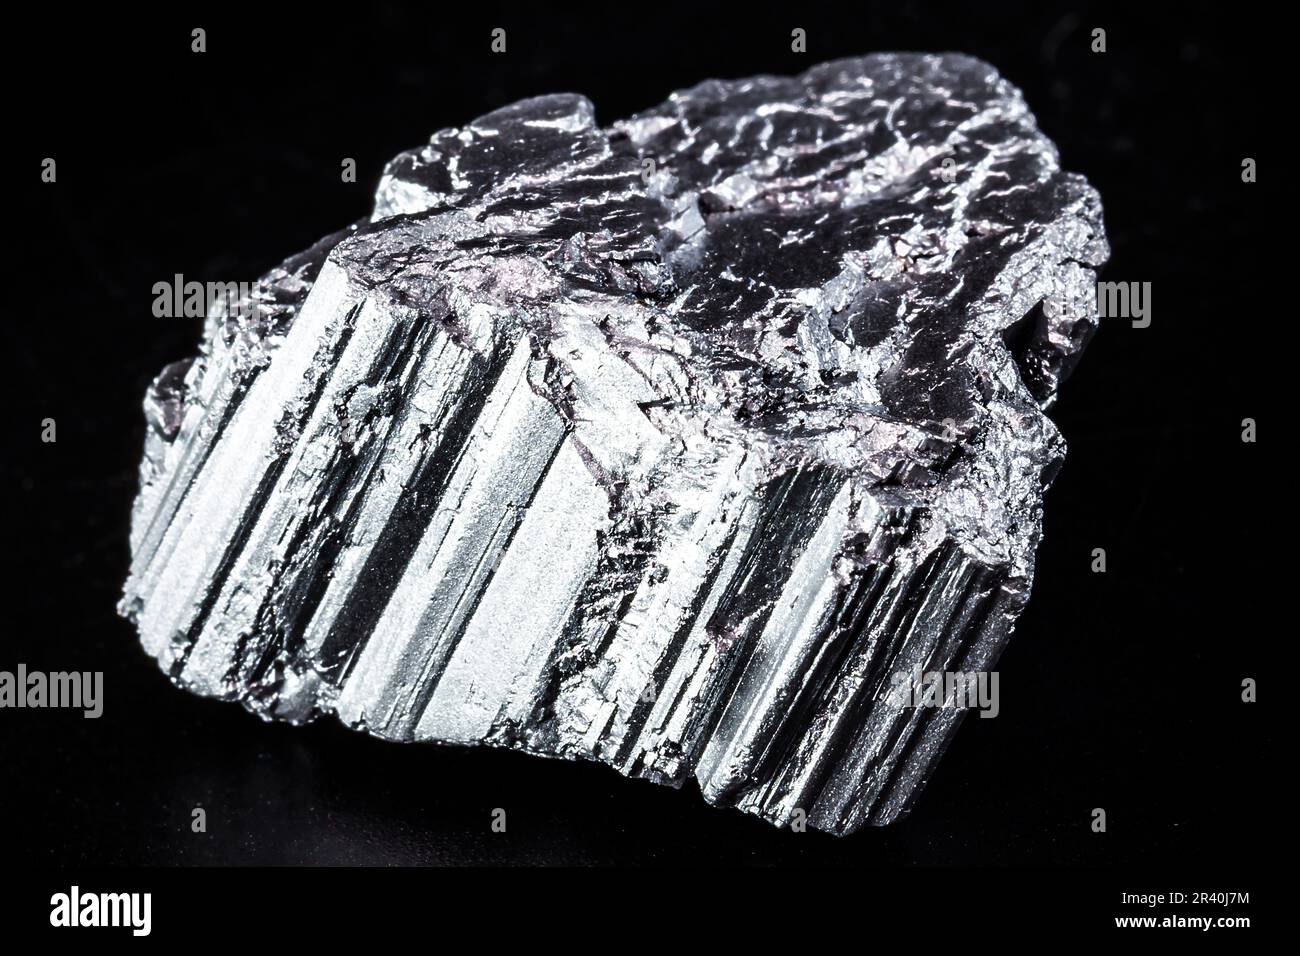 neodymium is a magnetic chemical element with the symbol Nd, in solid state. It is part of the rare earth group, used in the technology industry Stock Photo